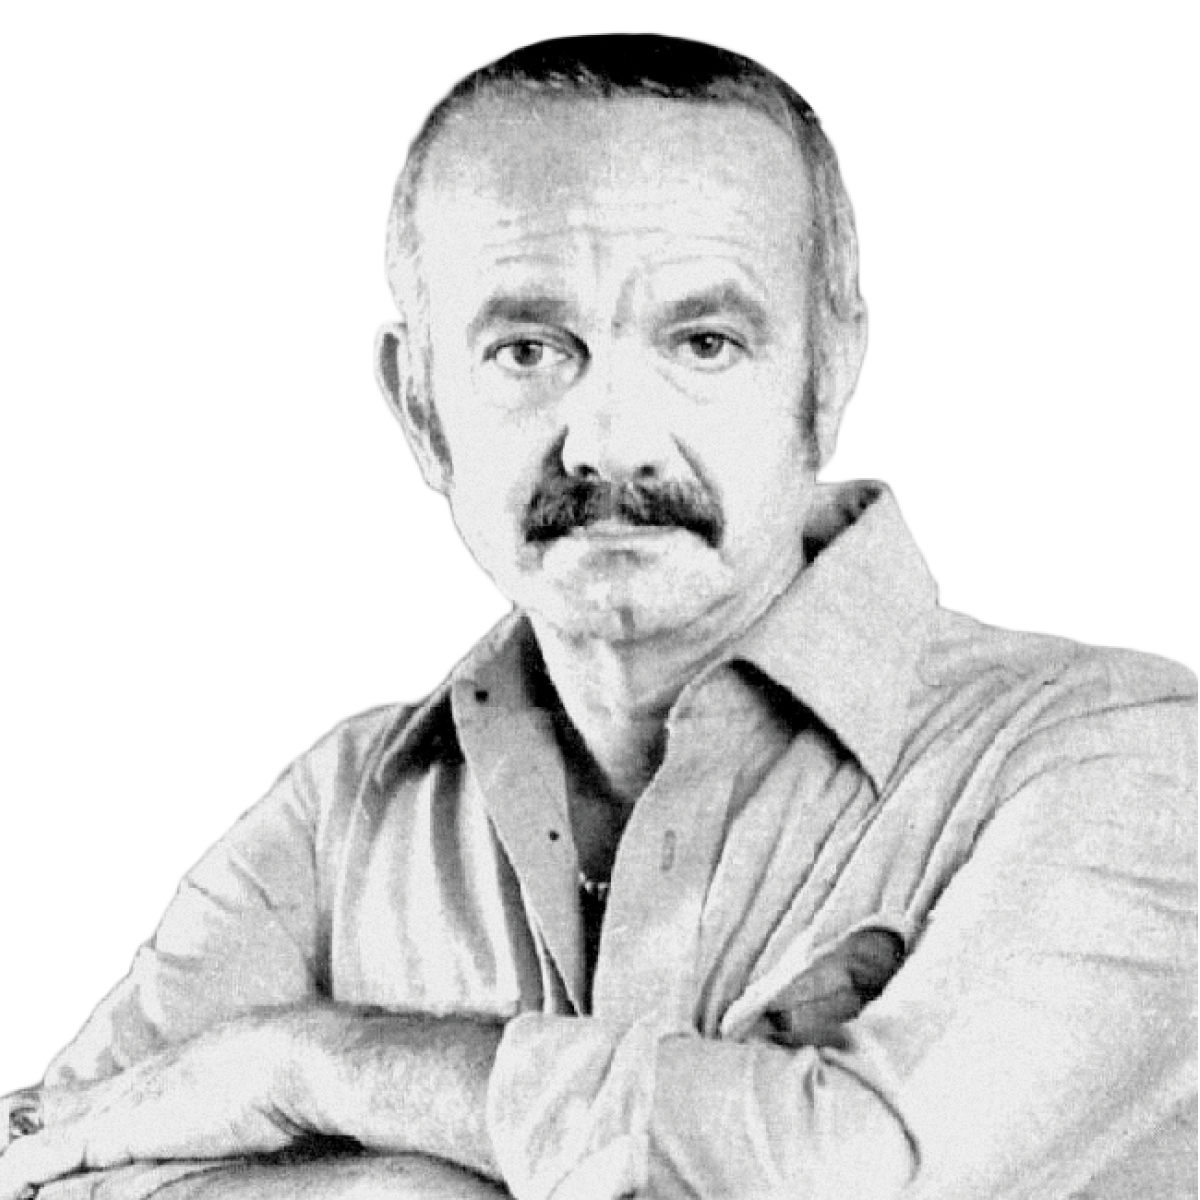 Black and white photograph of Astor Piazzolla